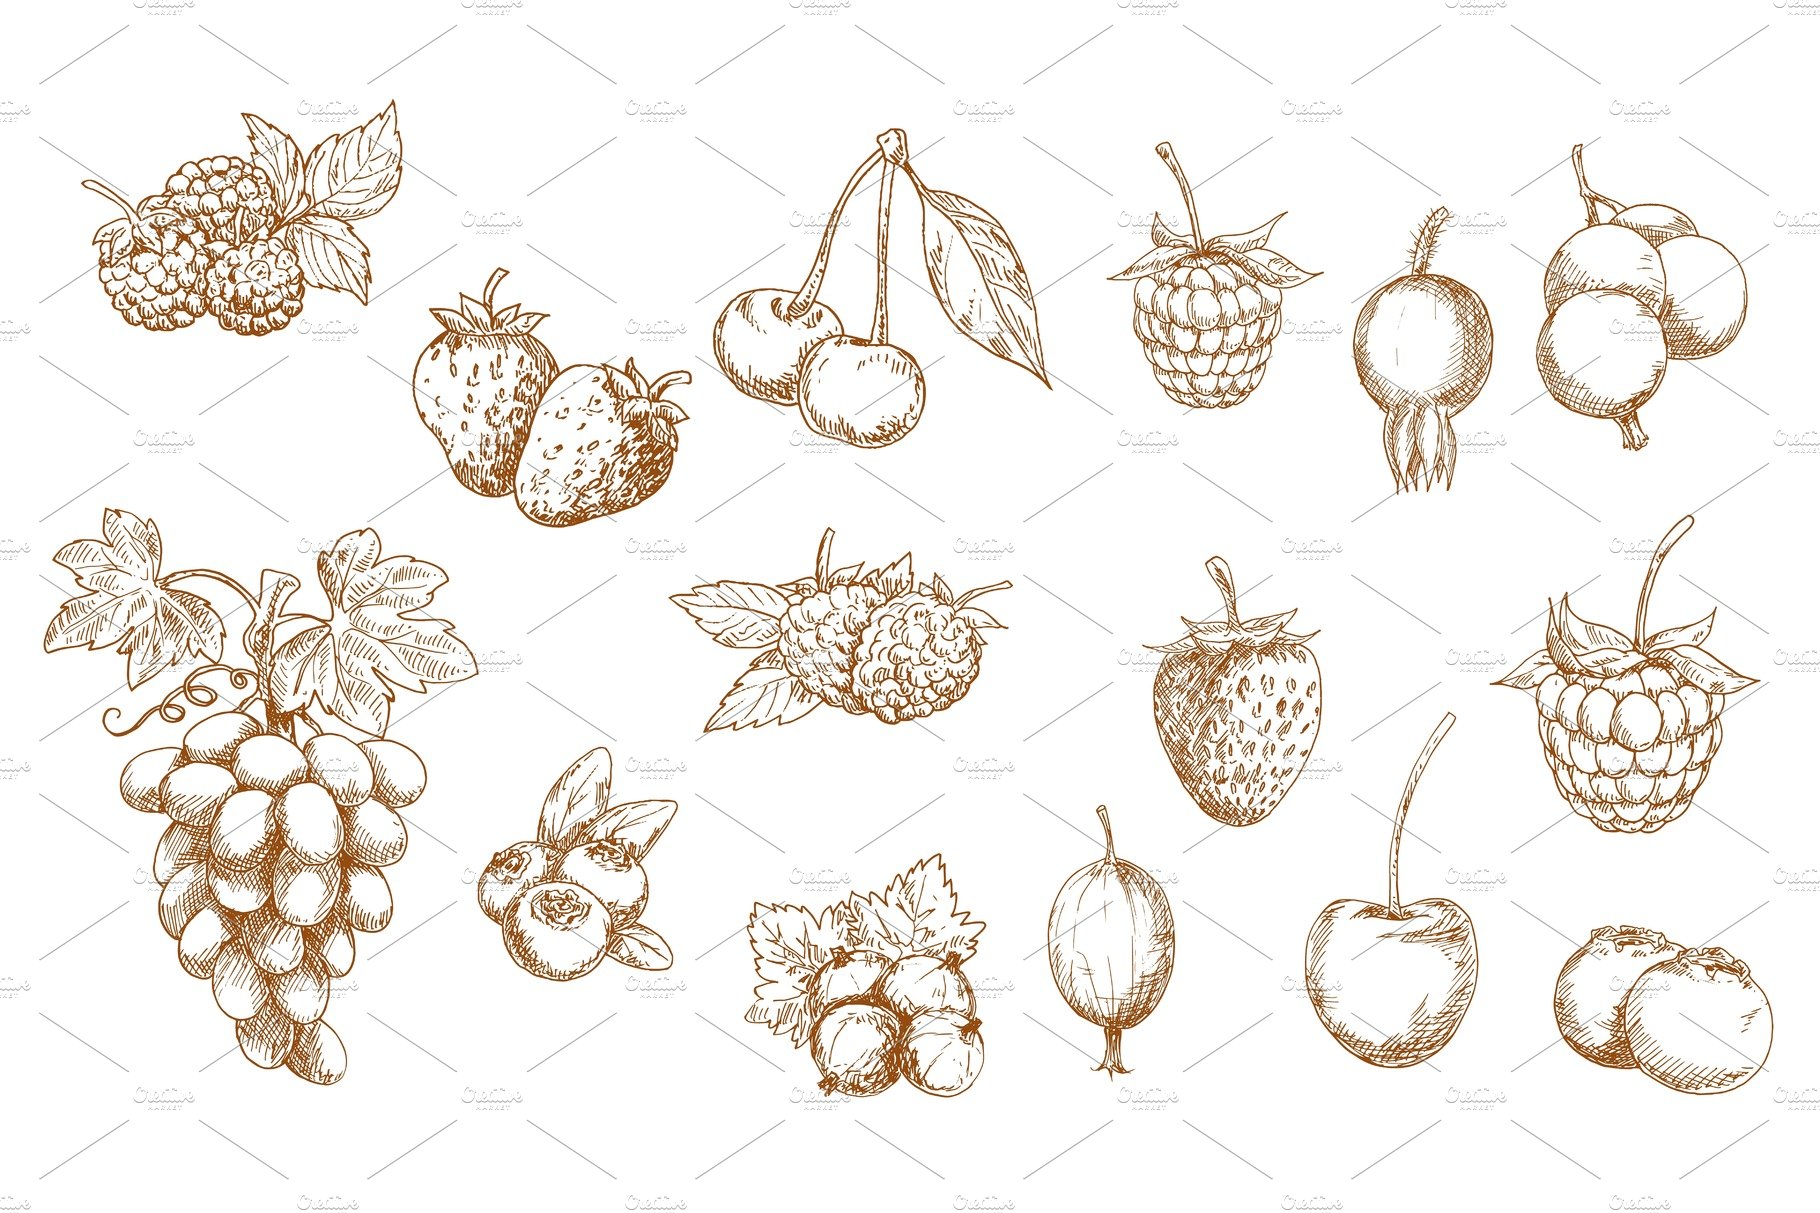 Berries and fruits vector sketches cover image.